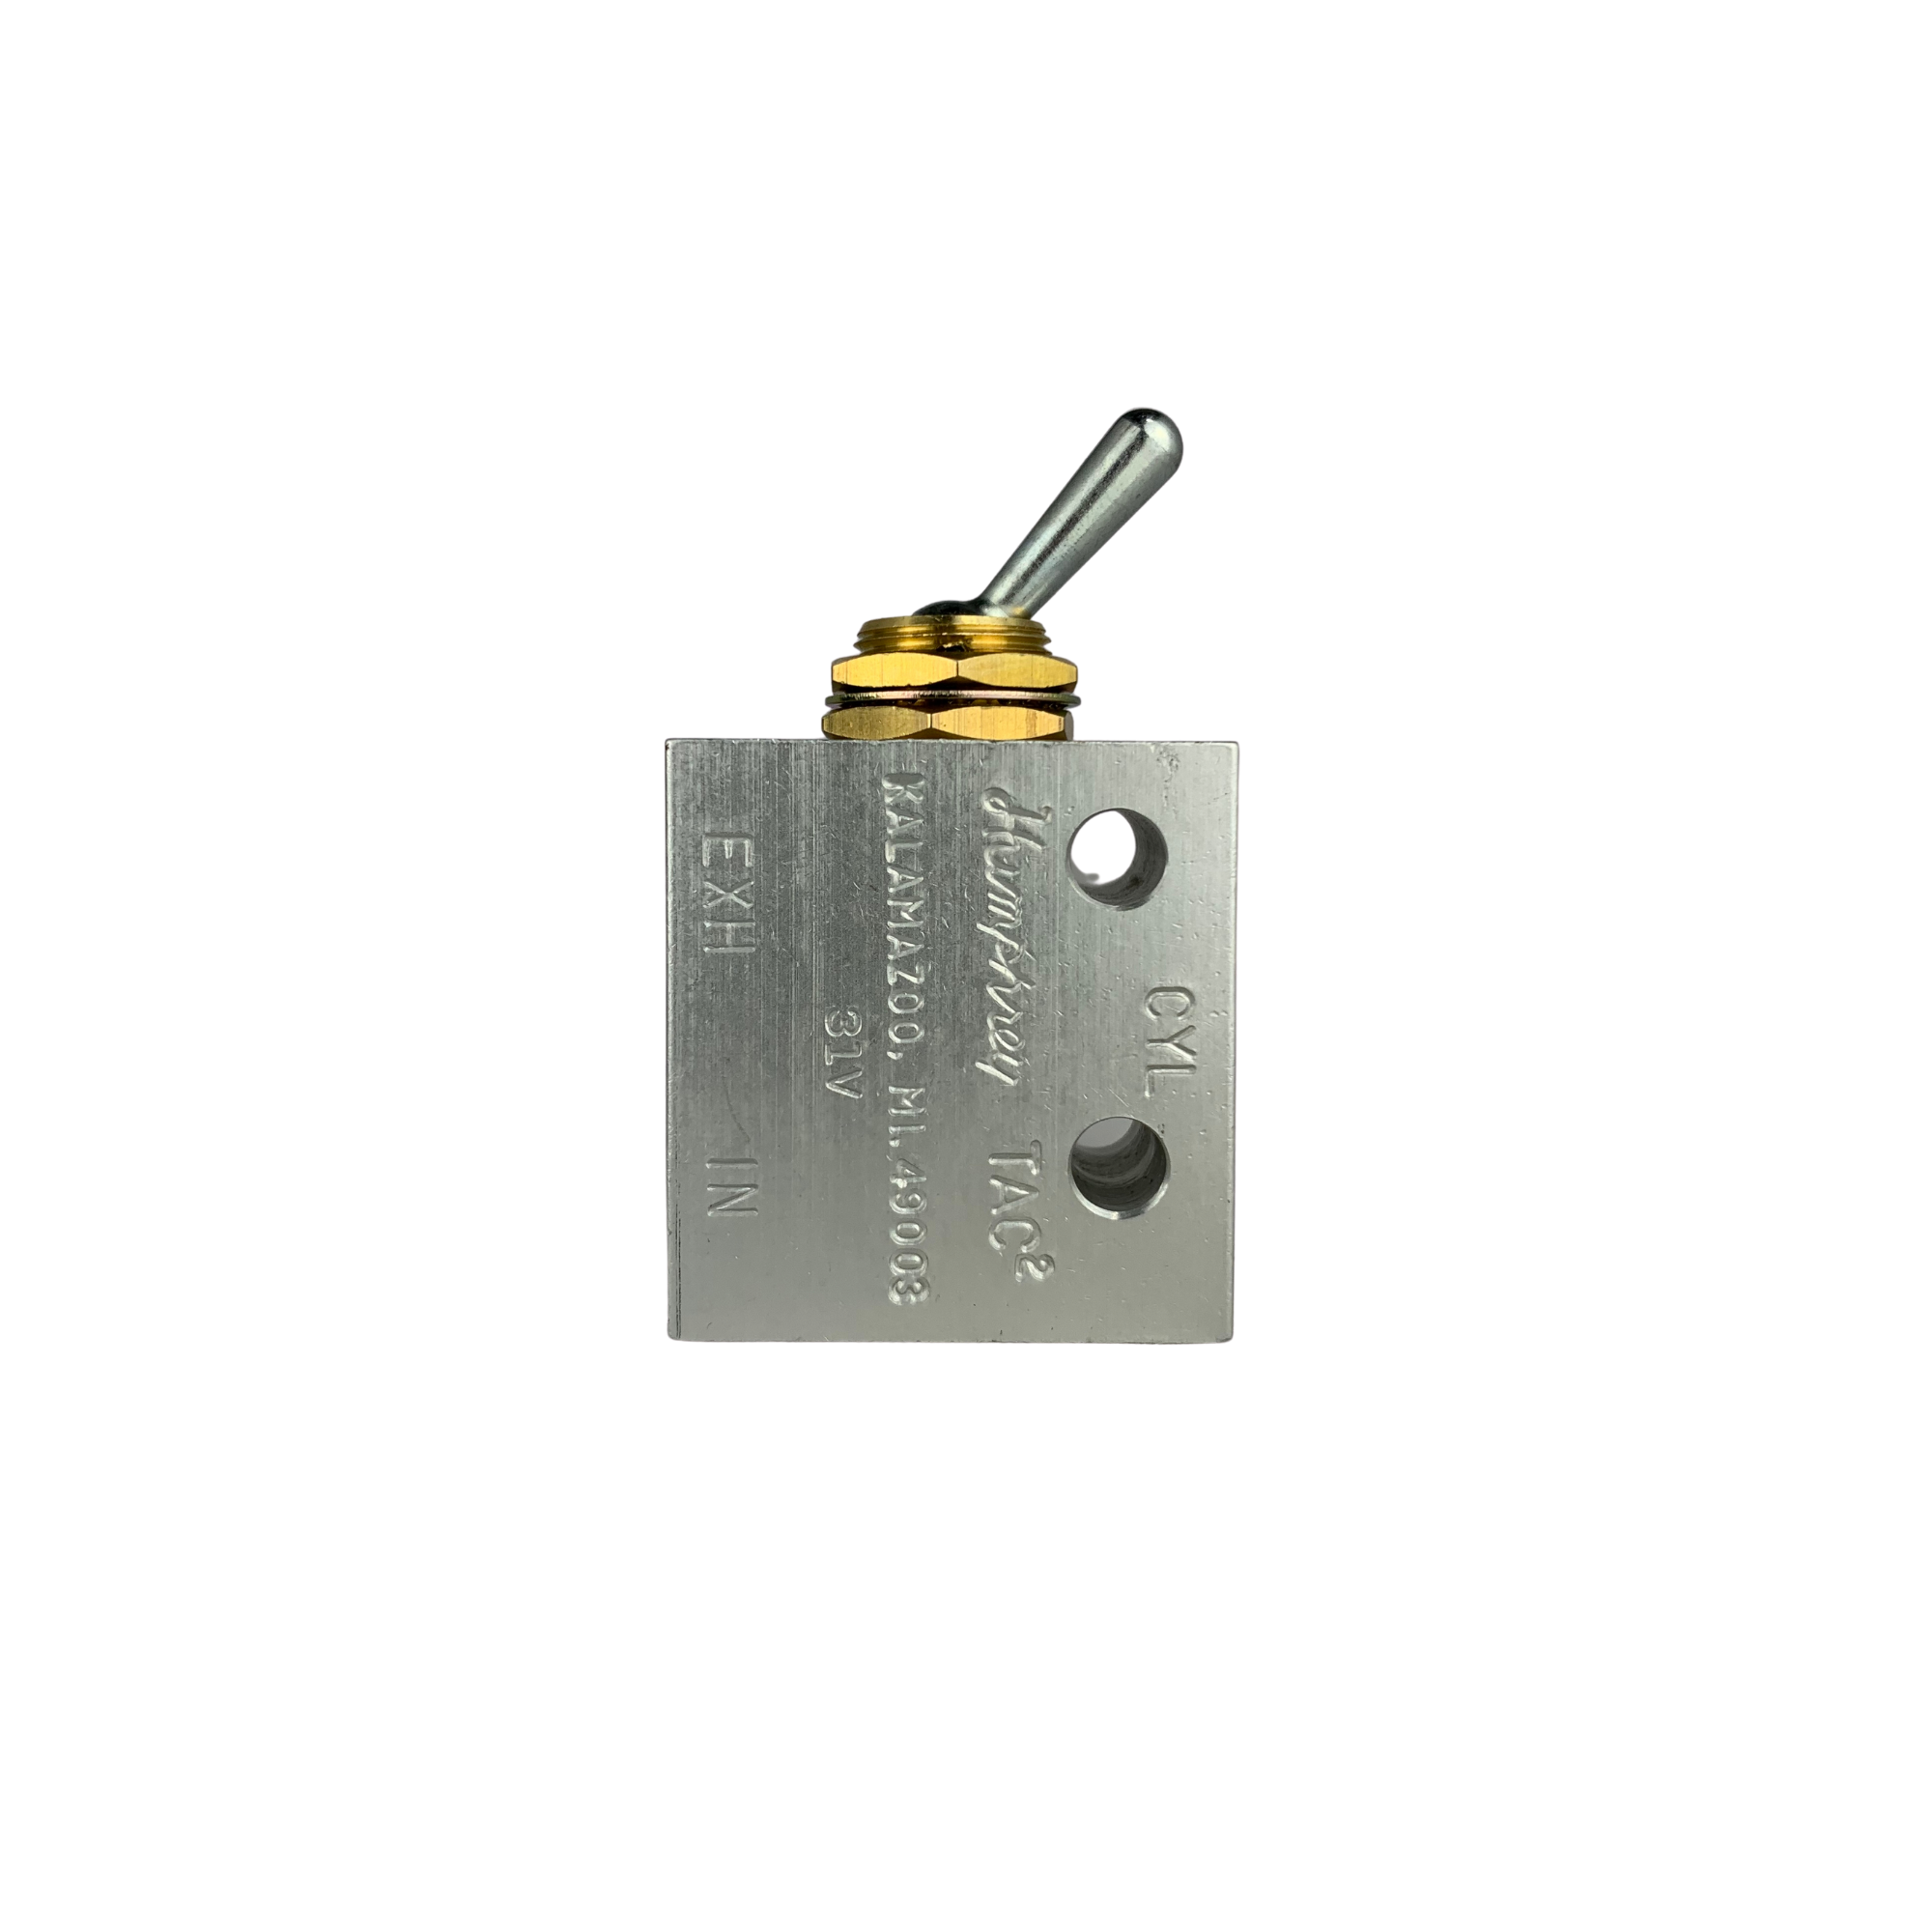 31V is a rectangular block with qa toggle switch. 1 threaded port on top face/ 2 threaded ports on bottom face